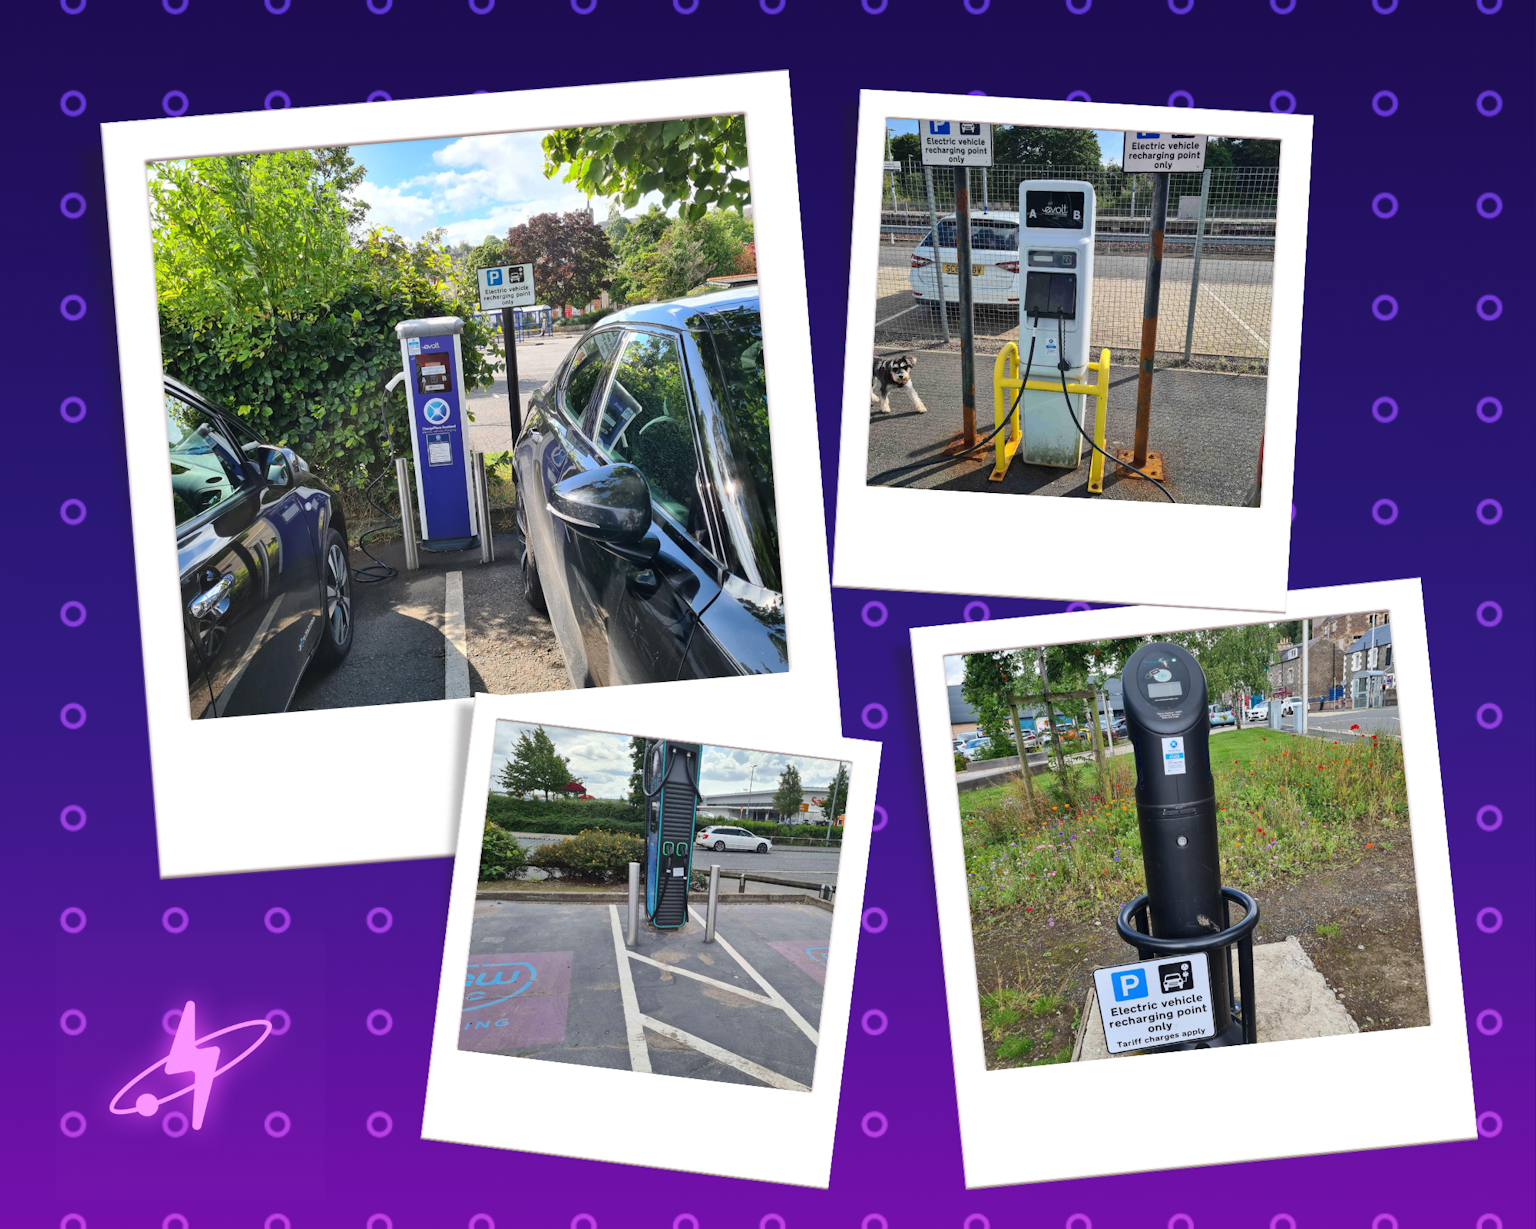 Winner photo competition (non-london) July charge point photos